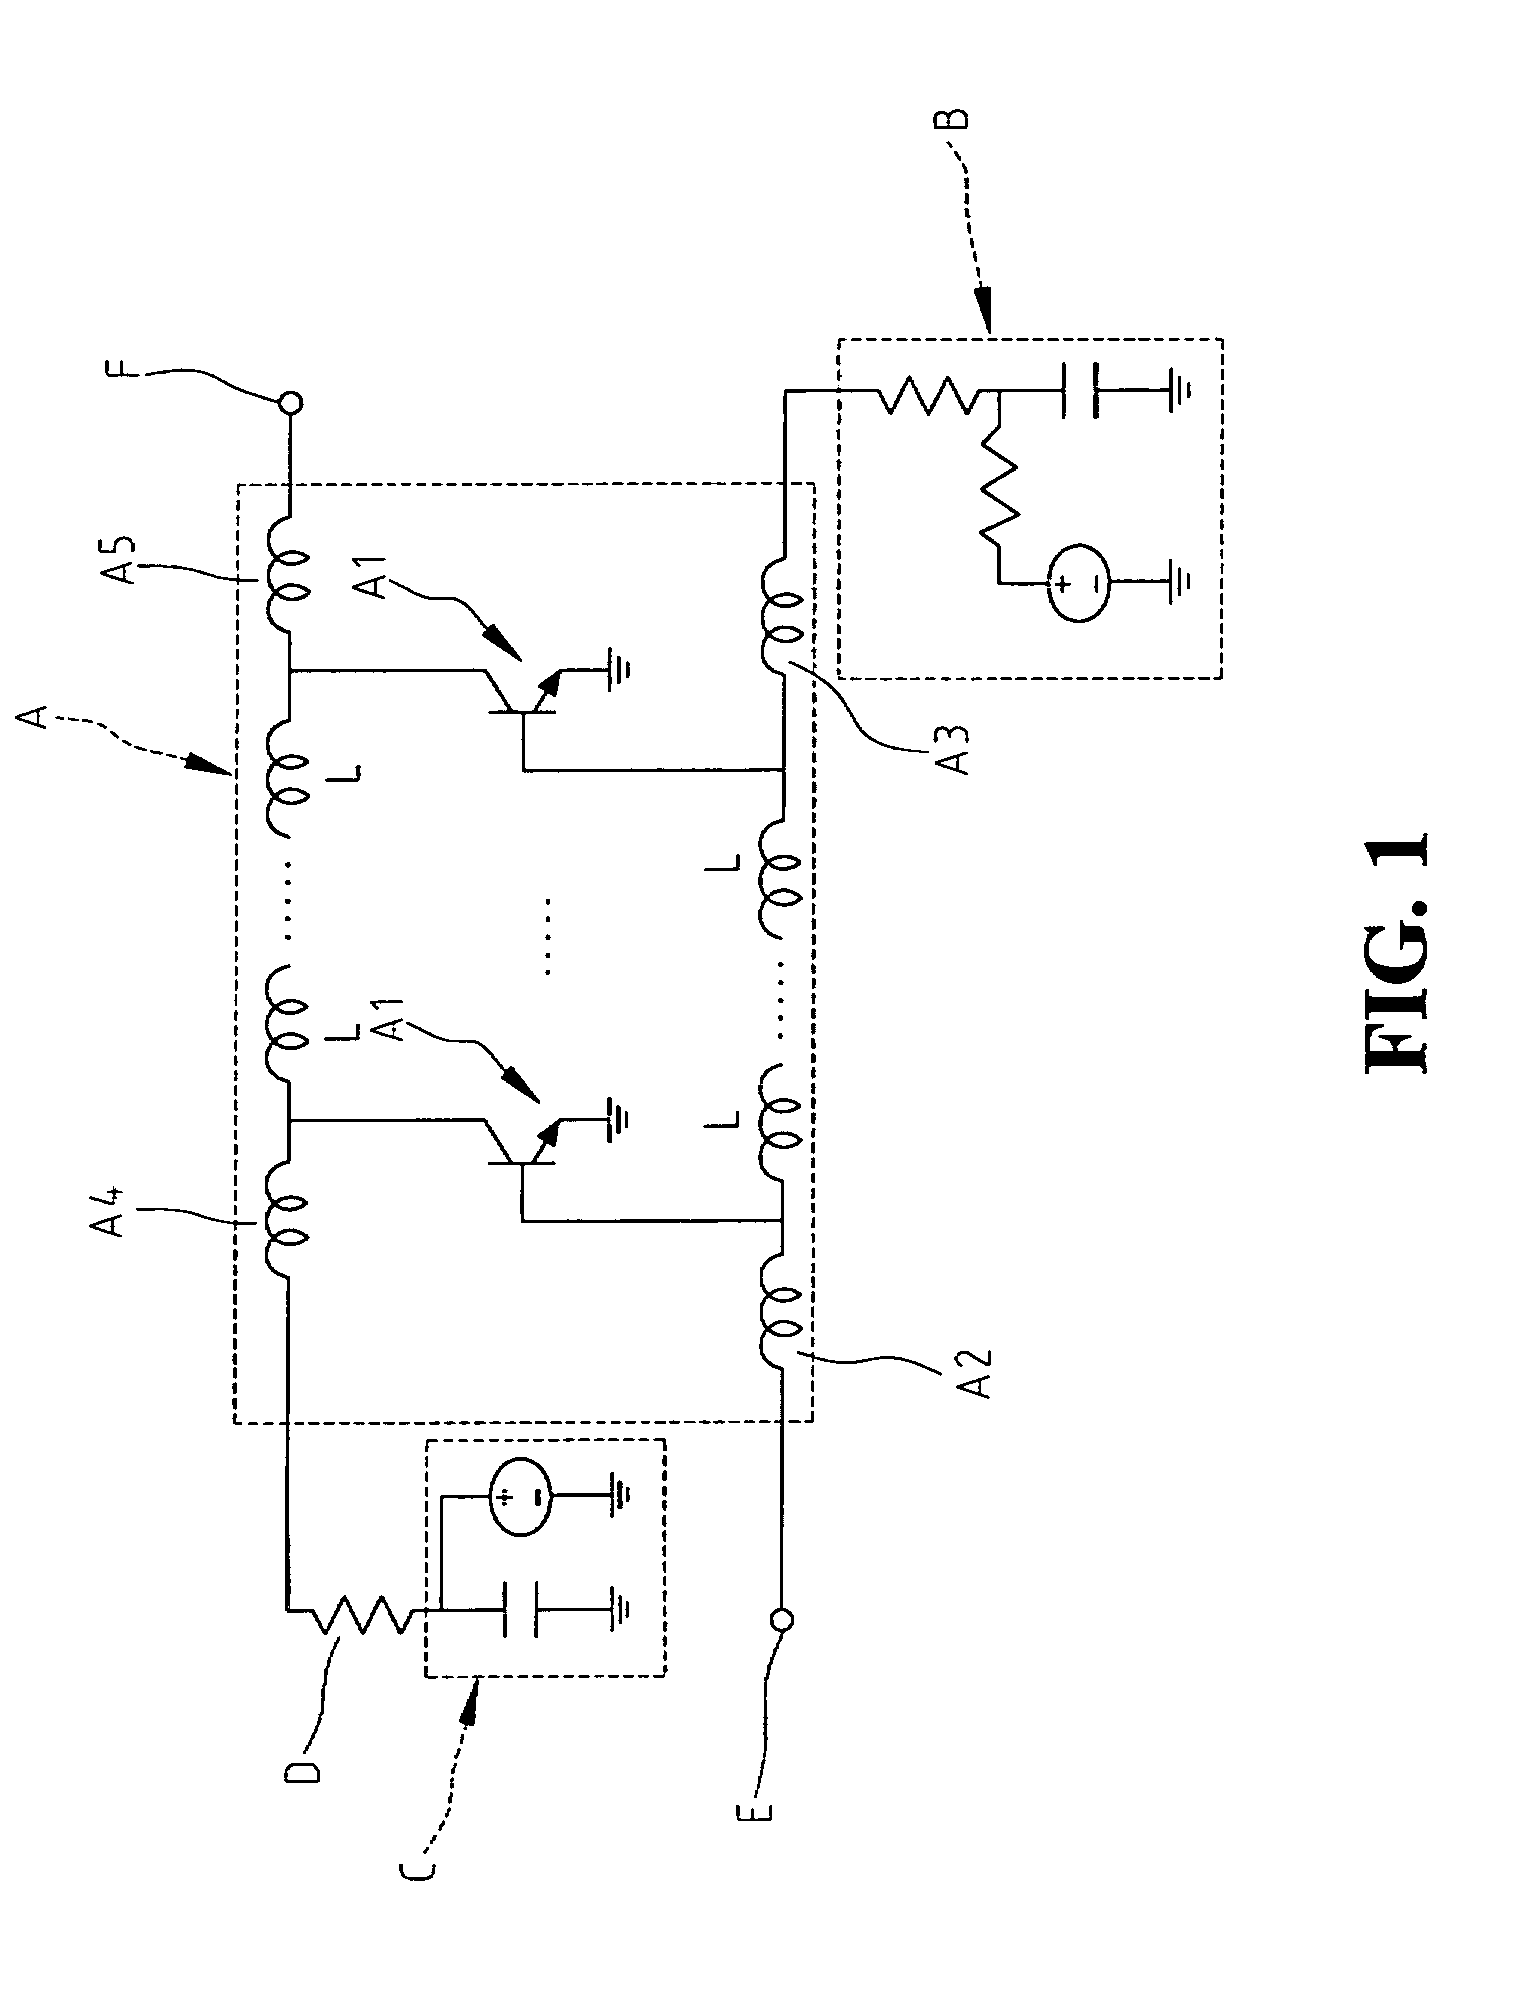 Distributed amplifier having a variable terminal resistance